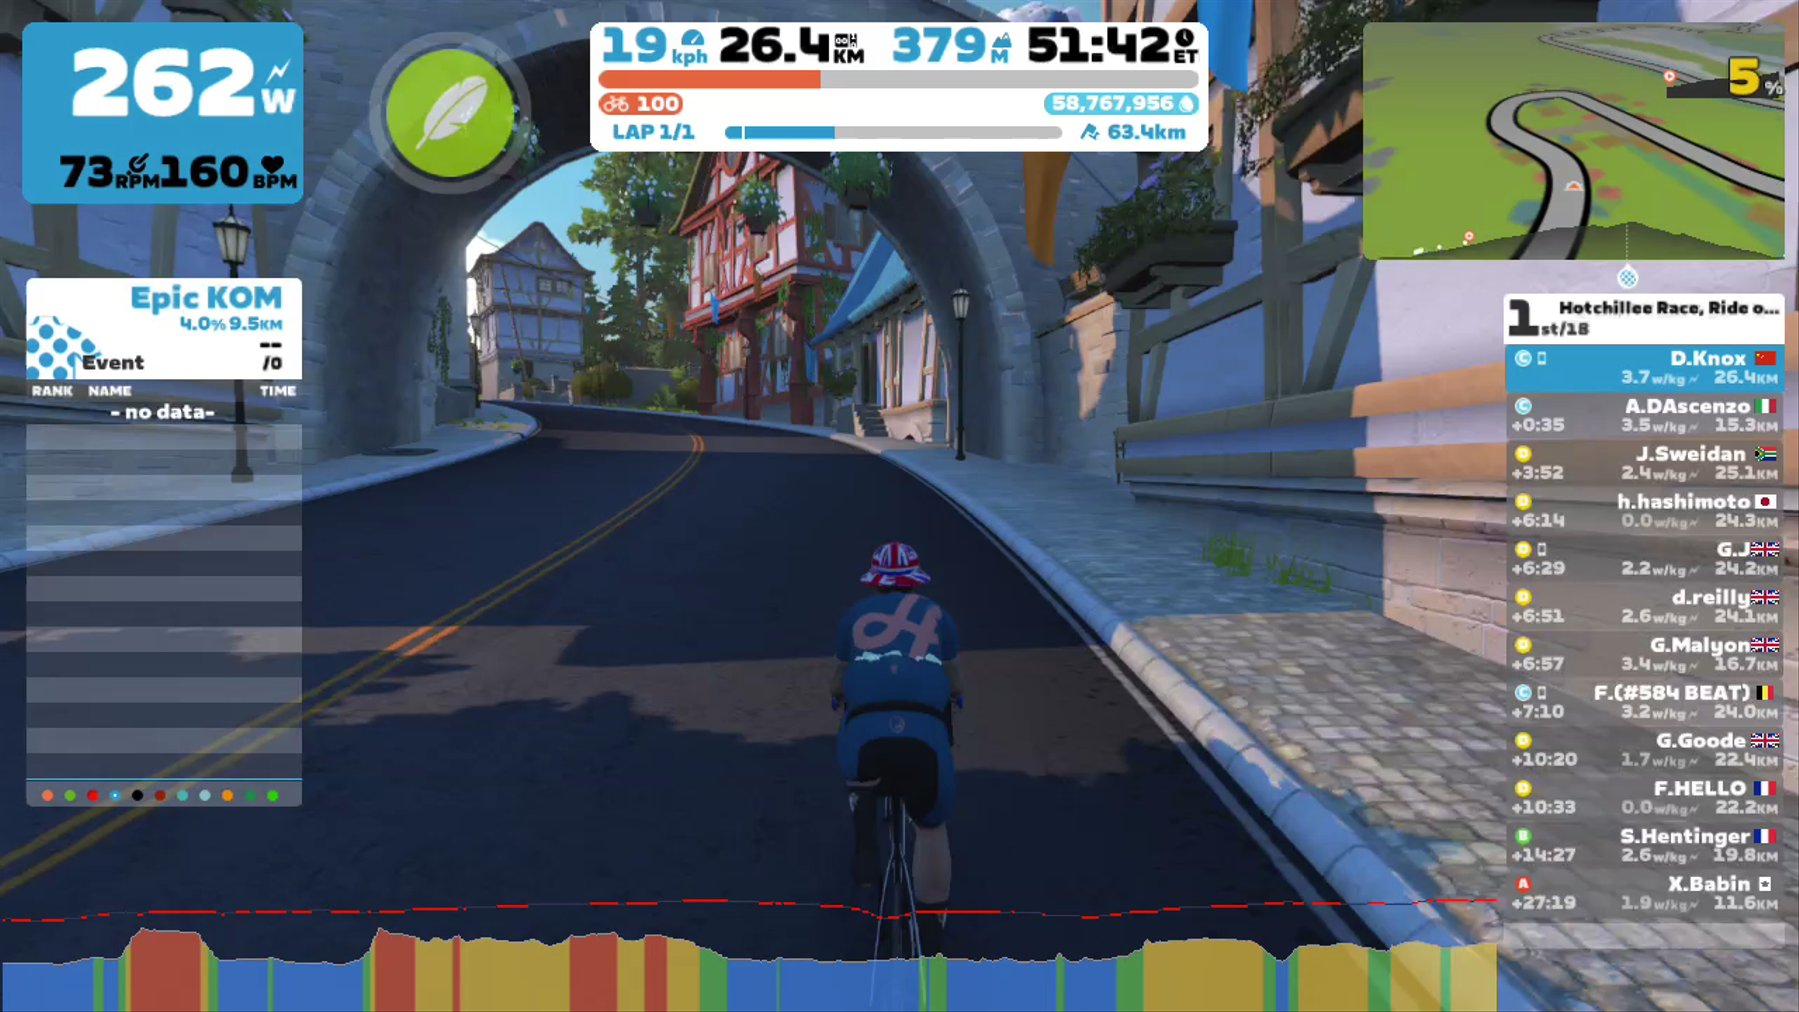 Zwift - Group Ride: Hotchillee Race, Ride or Conquer Endurance ride (C) on Four Horsemen in Watopia